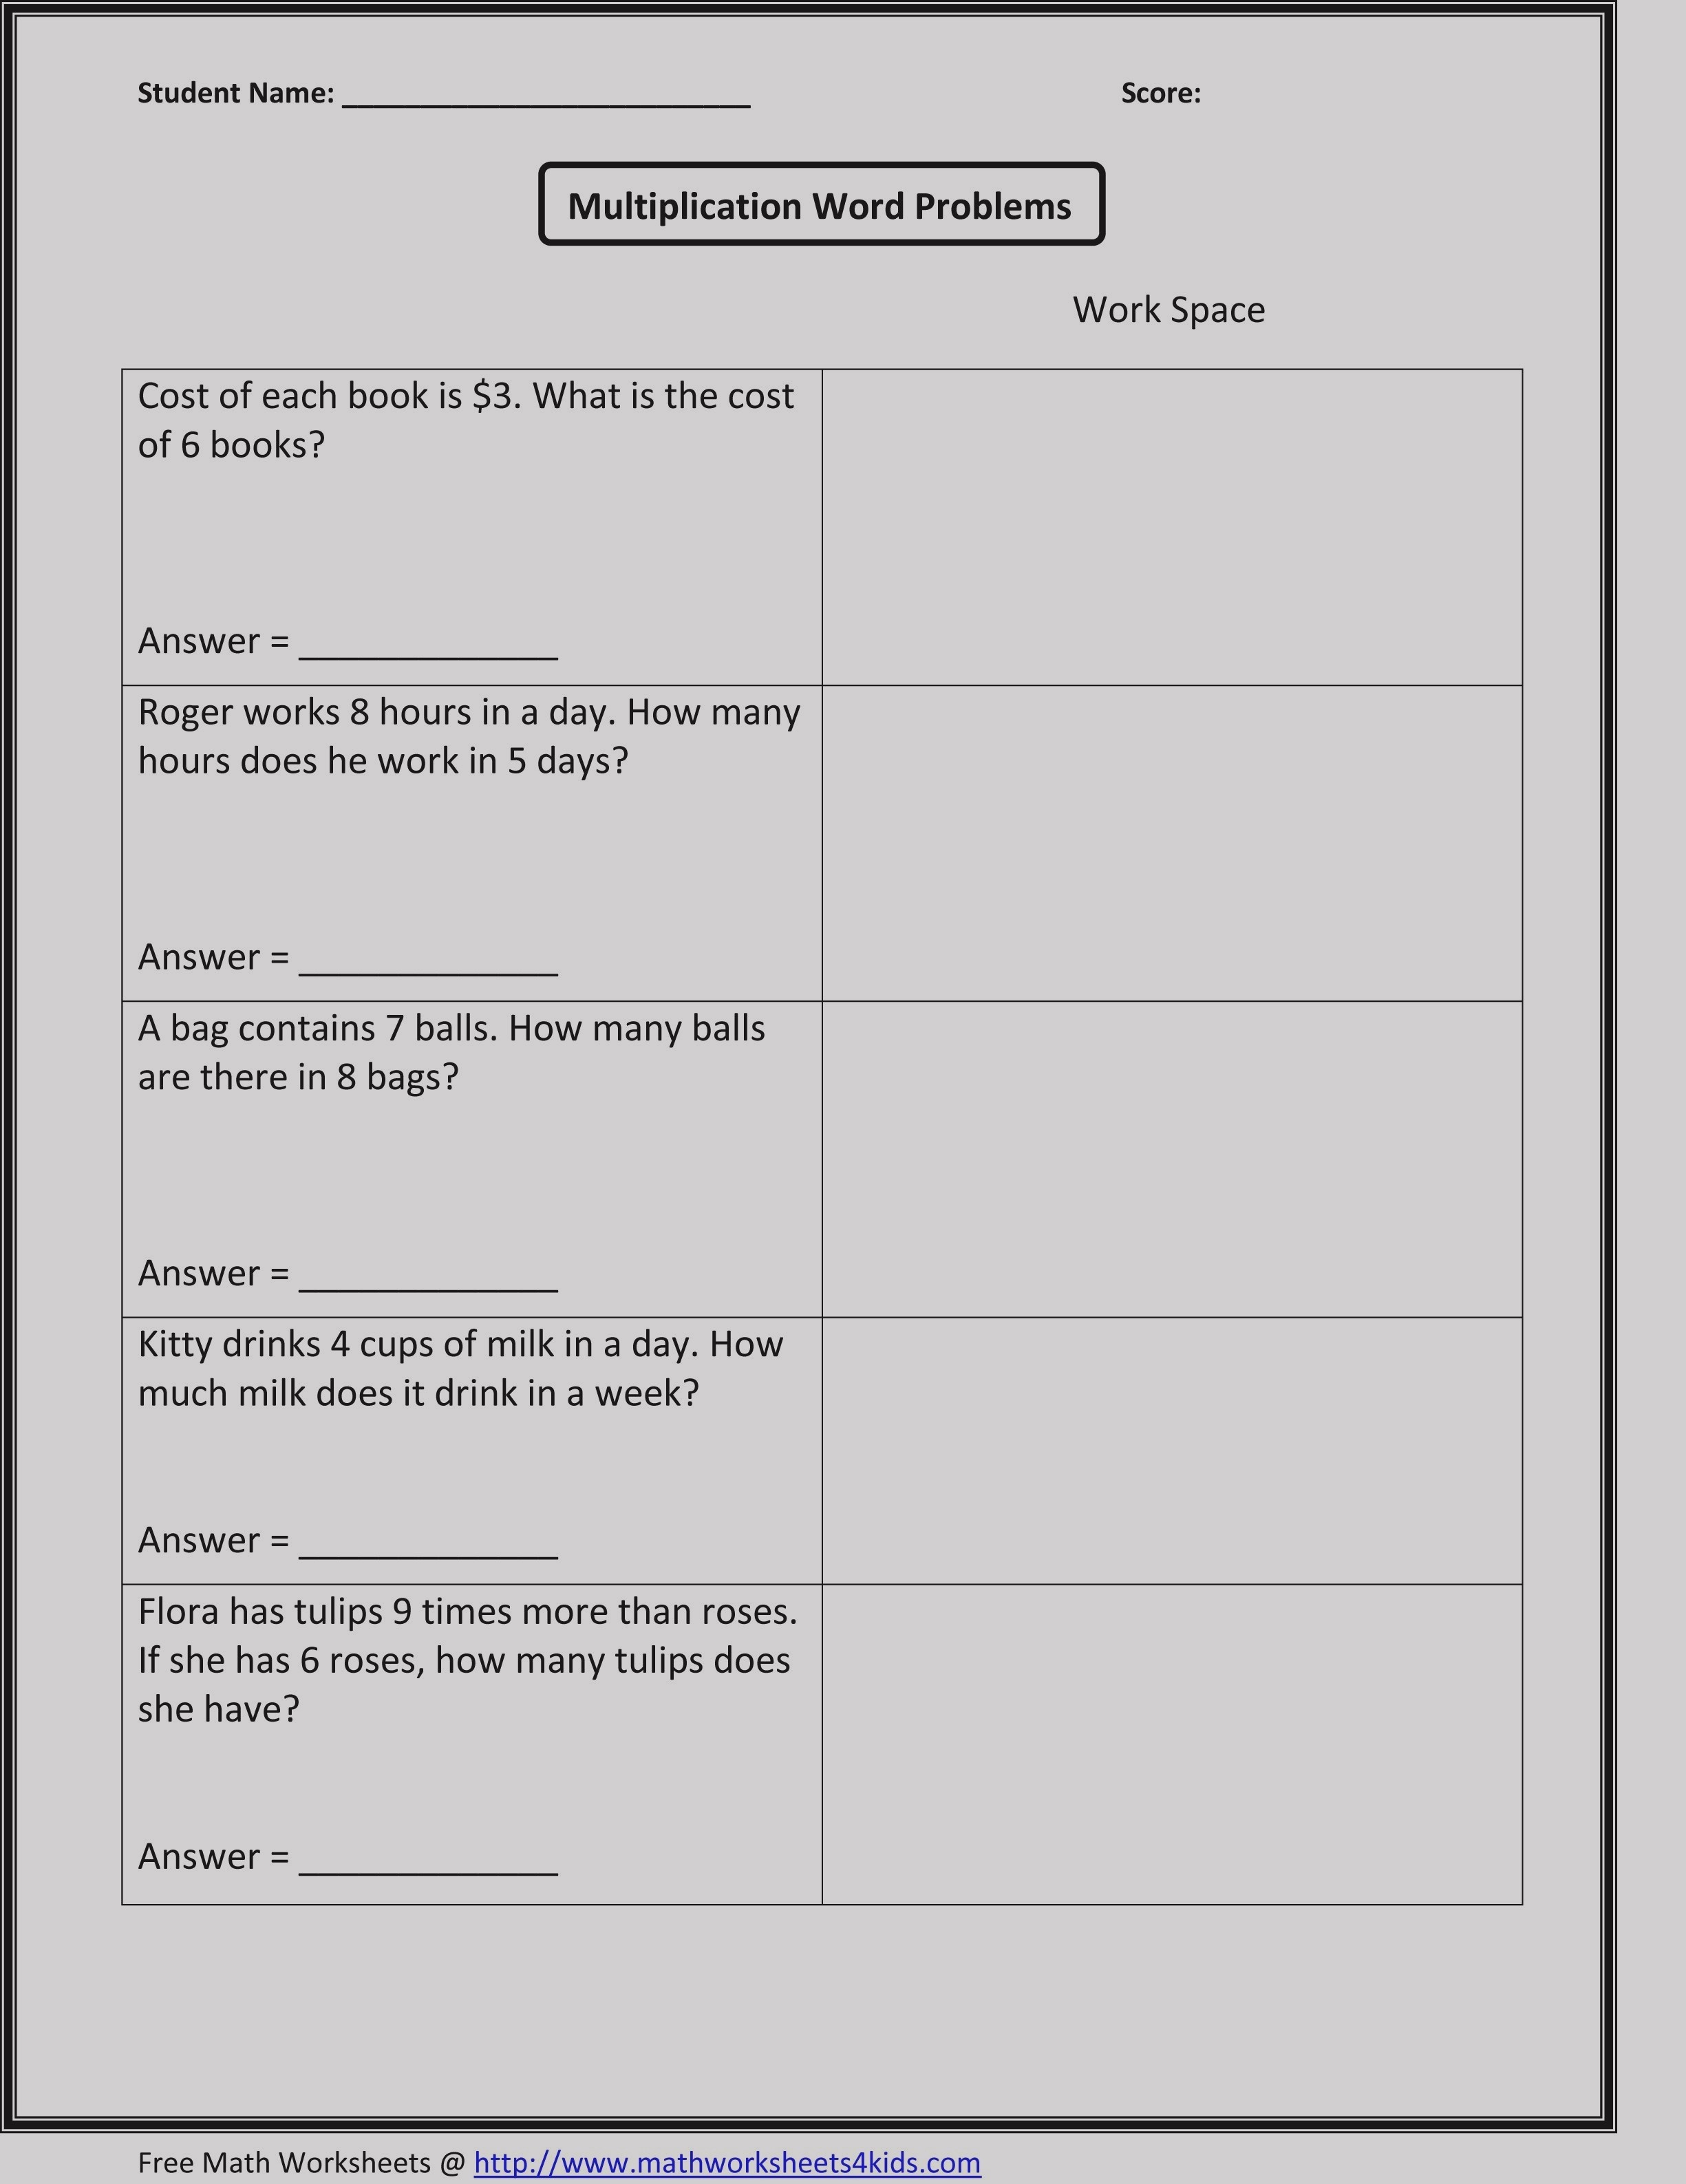 Worksheet: Awesome Coloring Books For Adults Grade Lesson Plan - Free Printable Social Skills Activities Worksheets